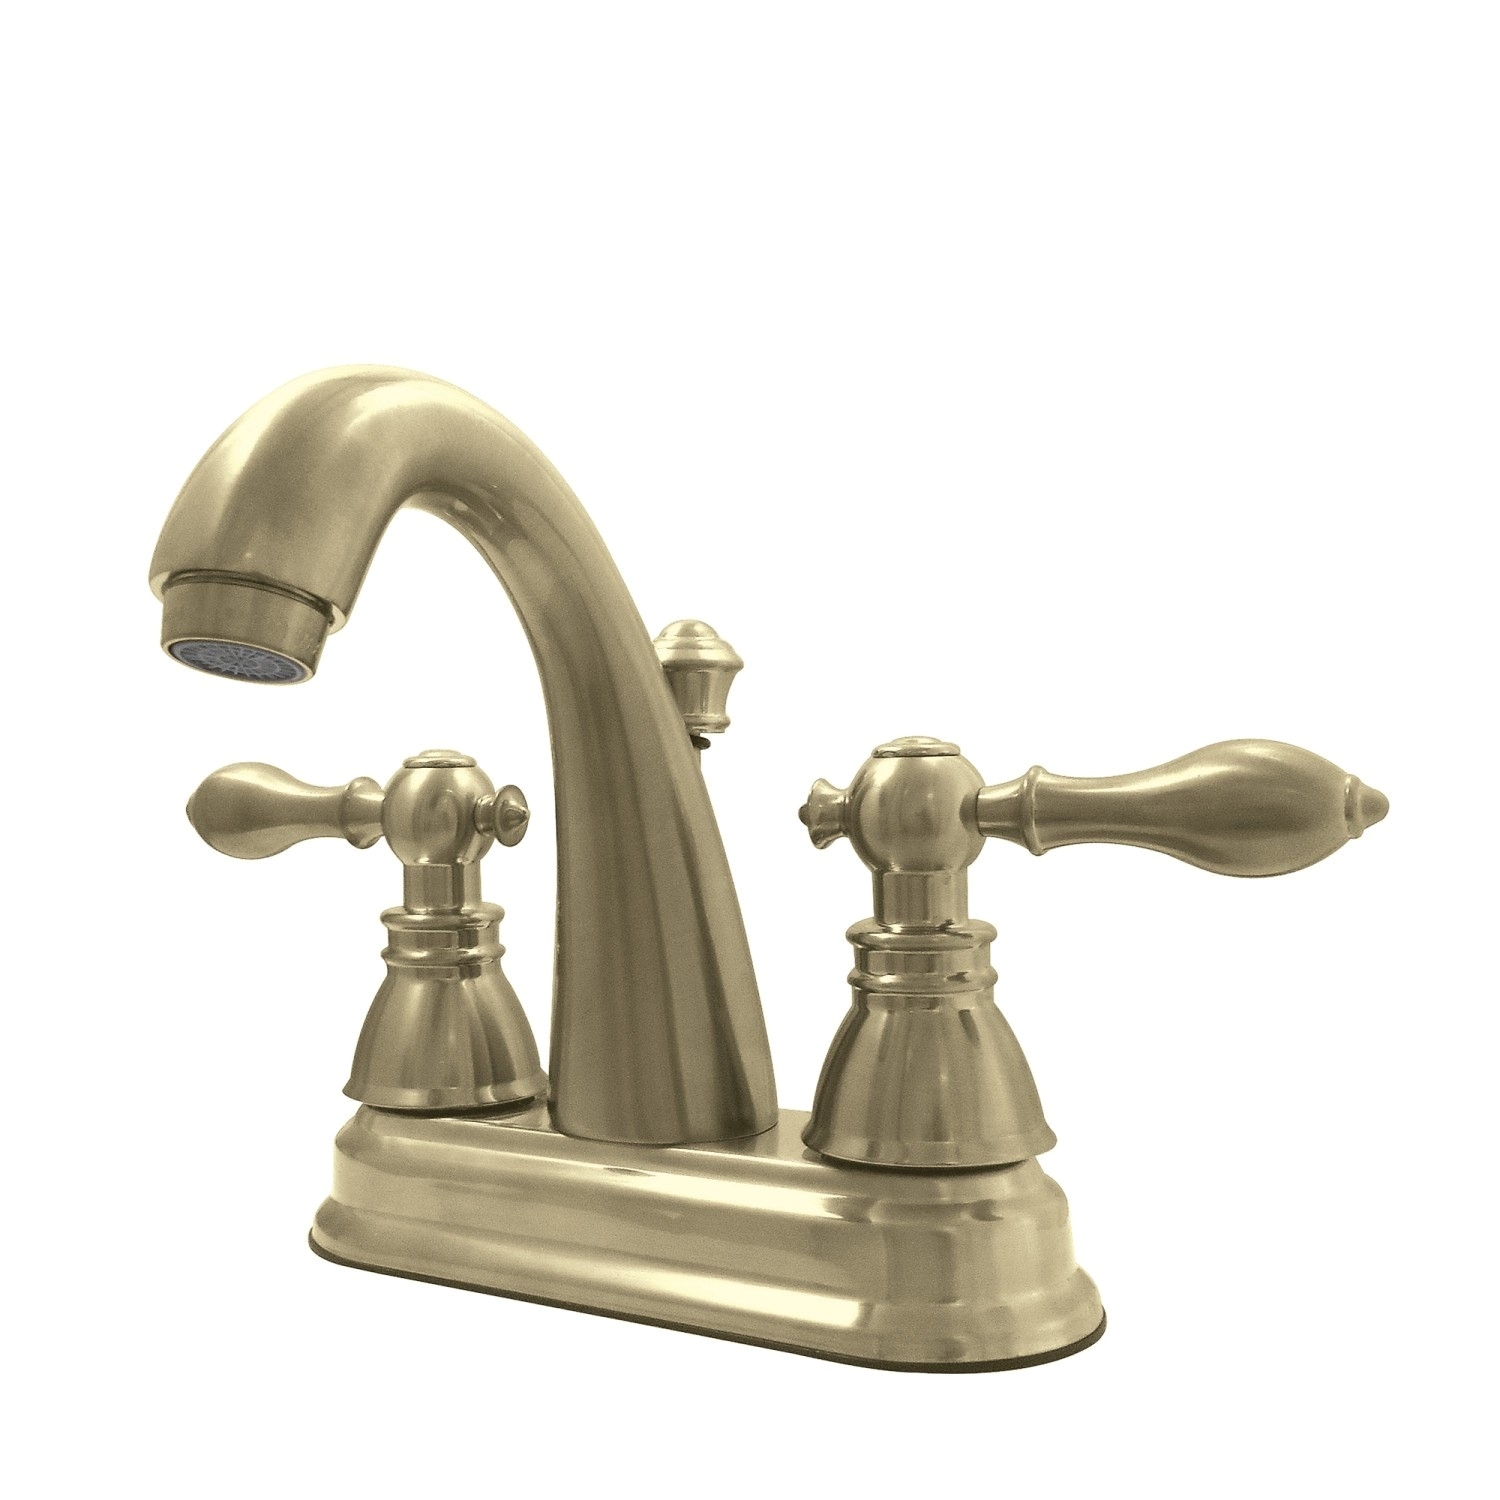 brass faucet bathroom awesome brass bathtub faucets h sink bathroom faucets repair i 0d cool parts